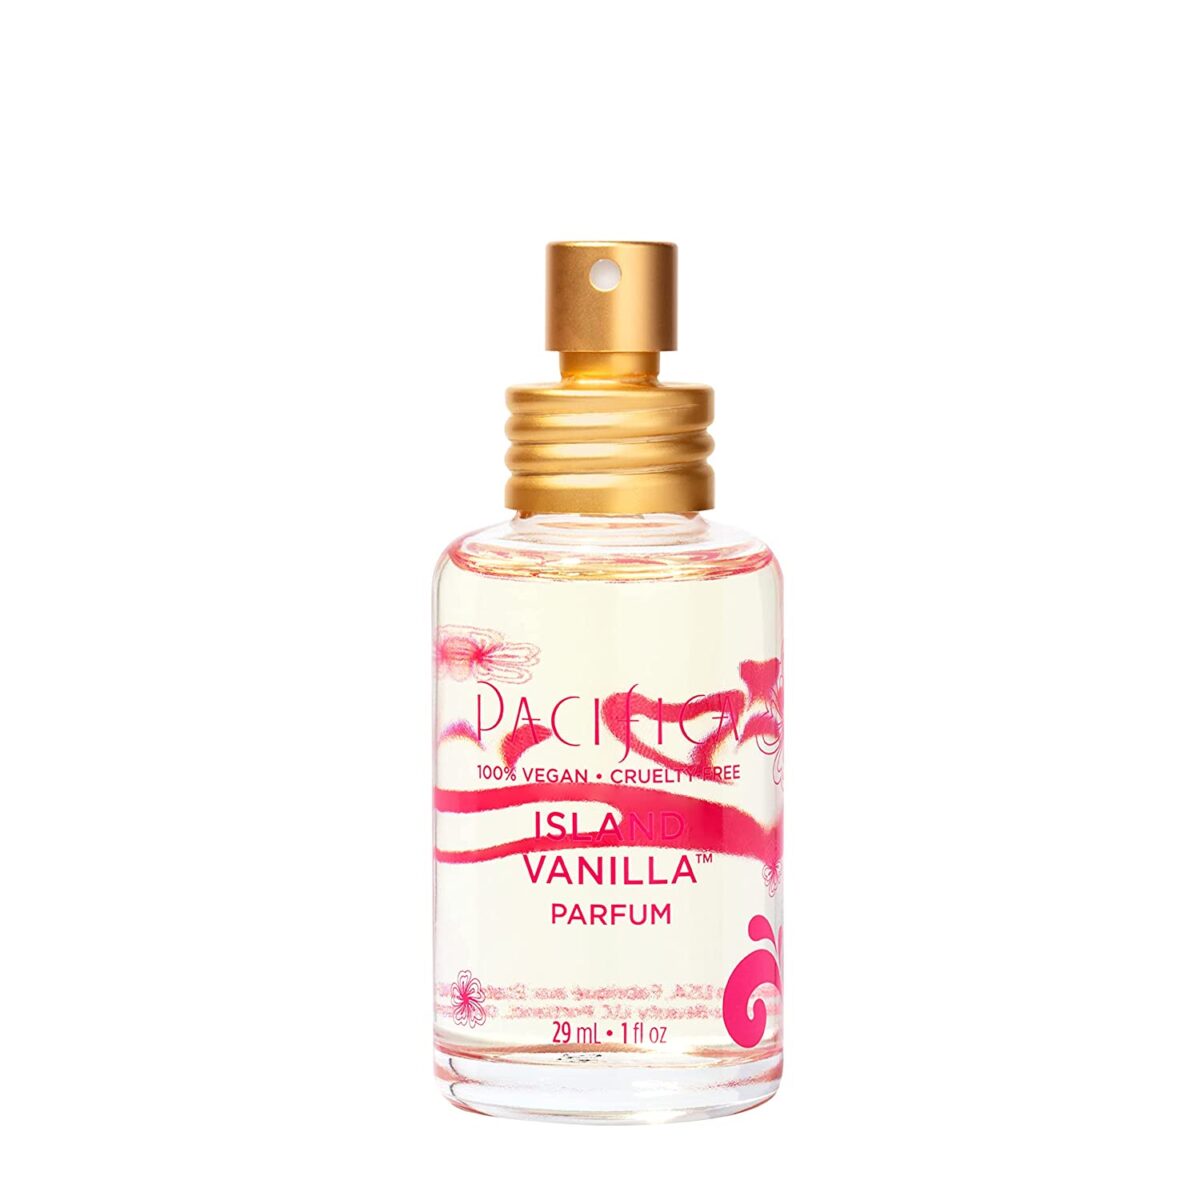 A bottle of Pacifica Island Vanilla perfume for women| The Dating Divas